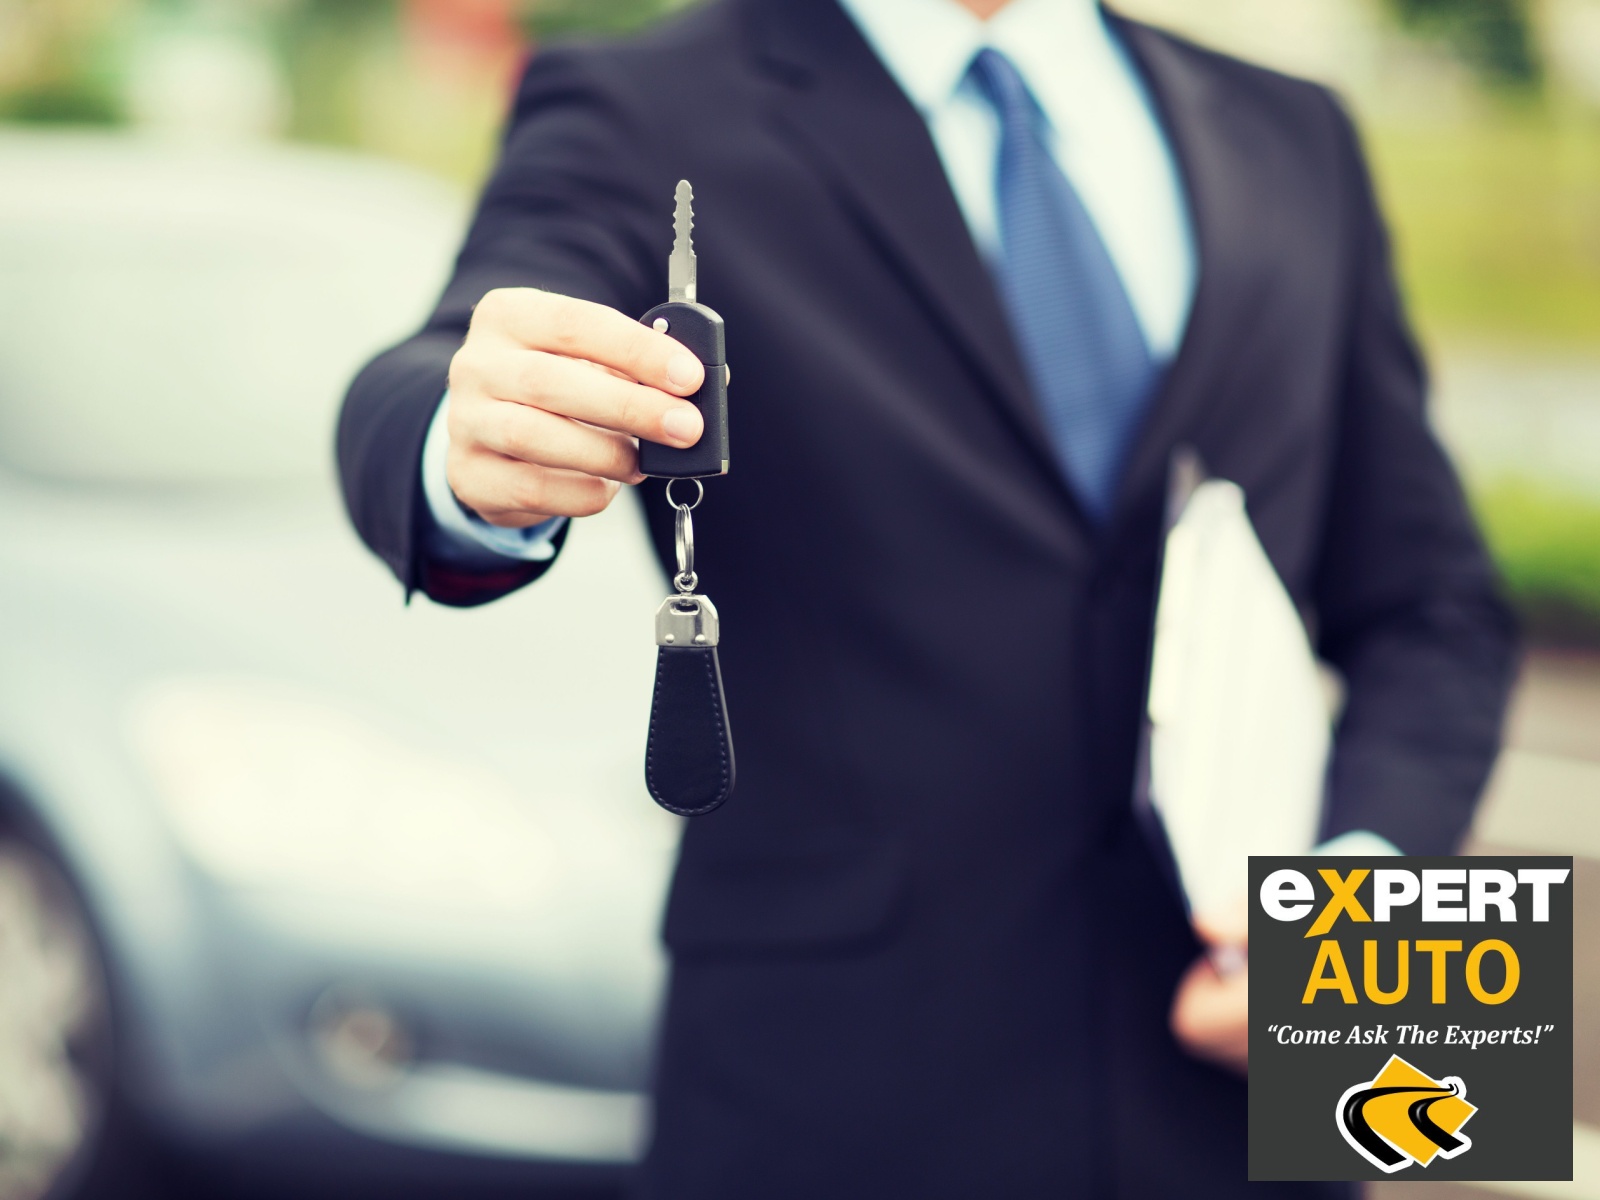 Discover Affordable Car Loans Near Clinton at Expert Auto